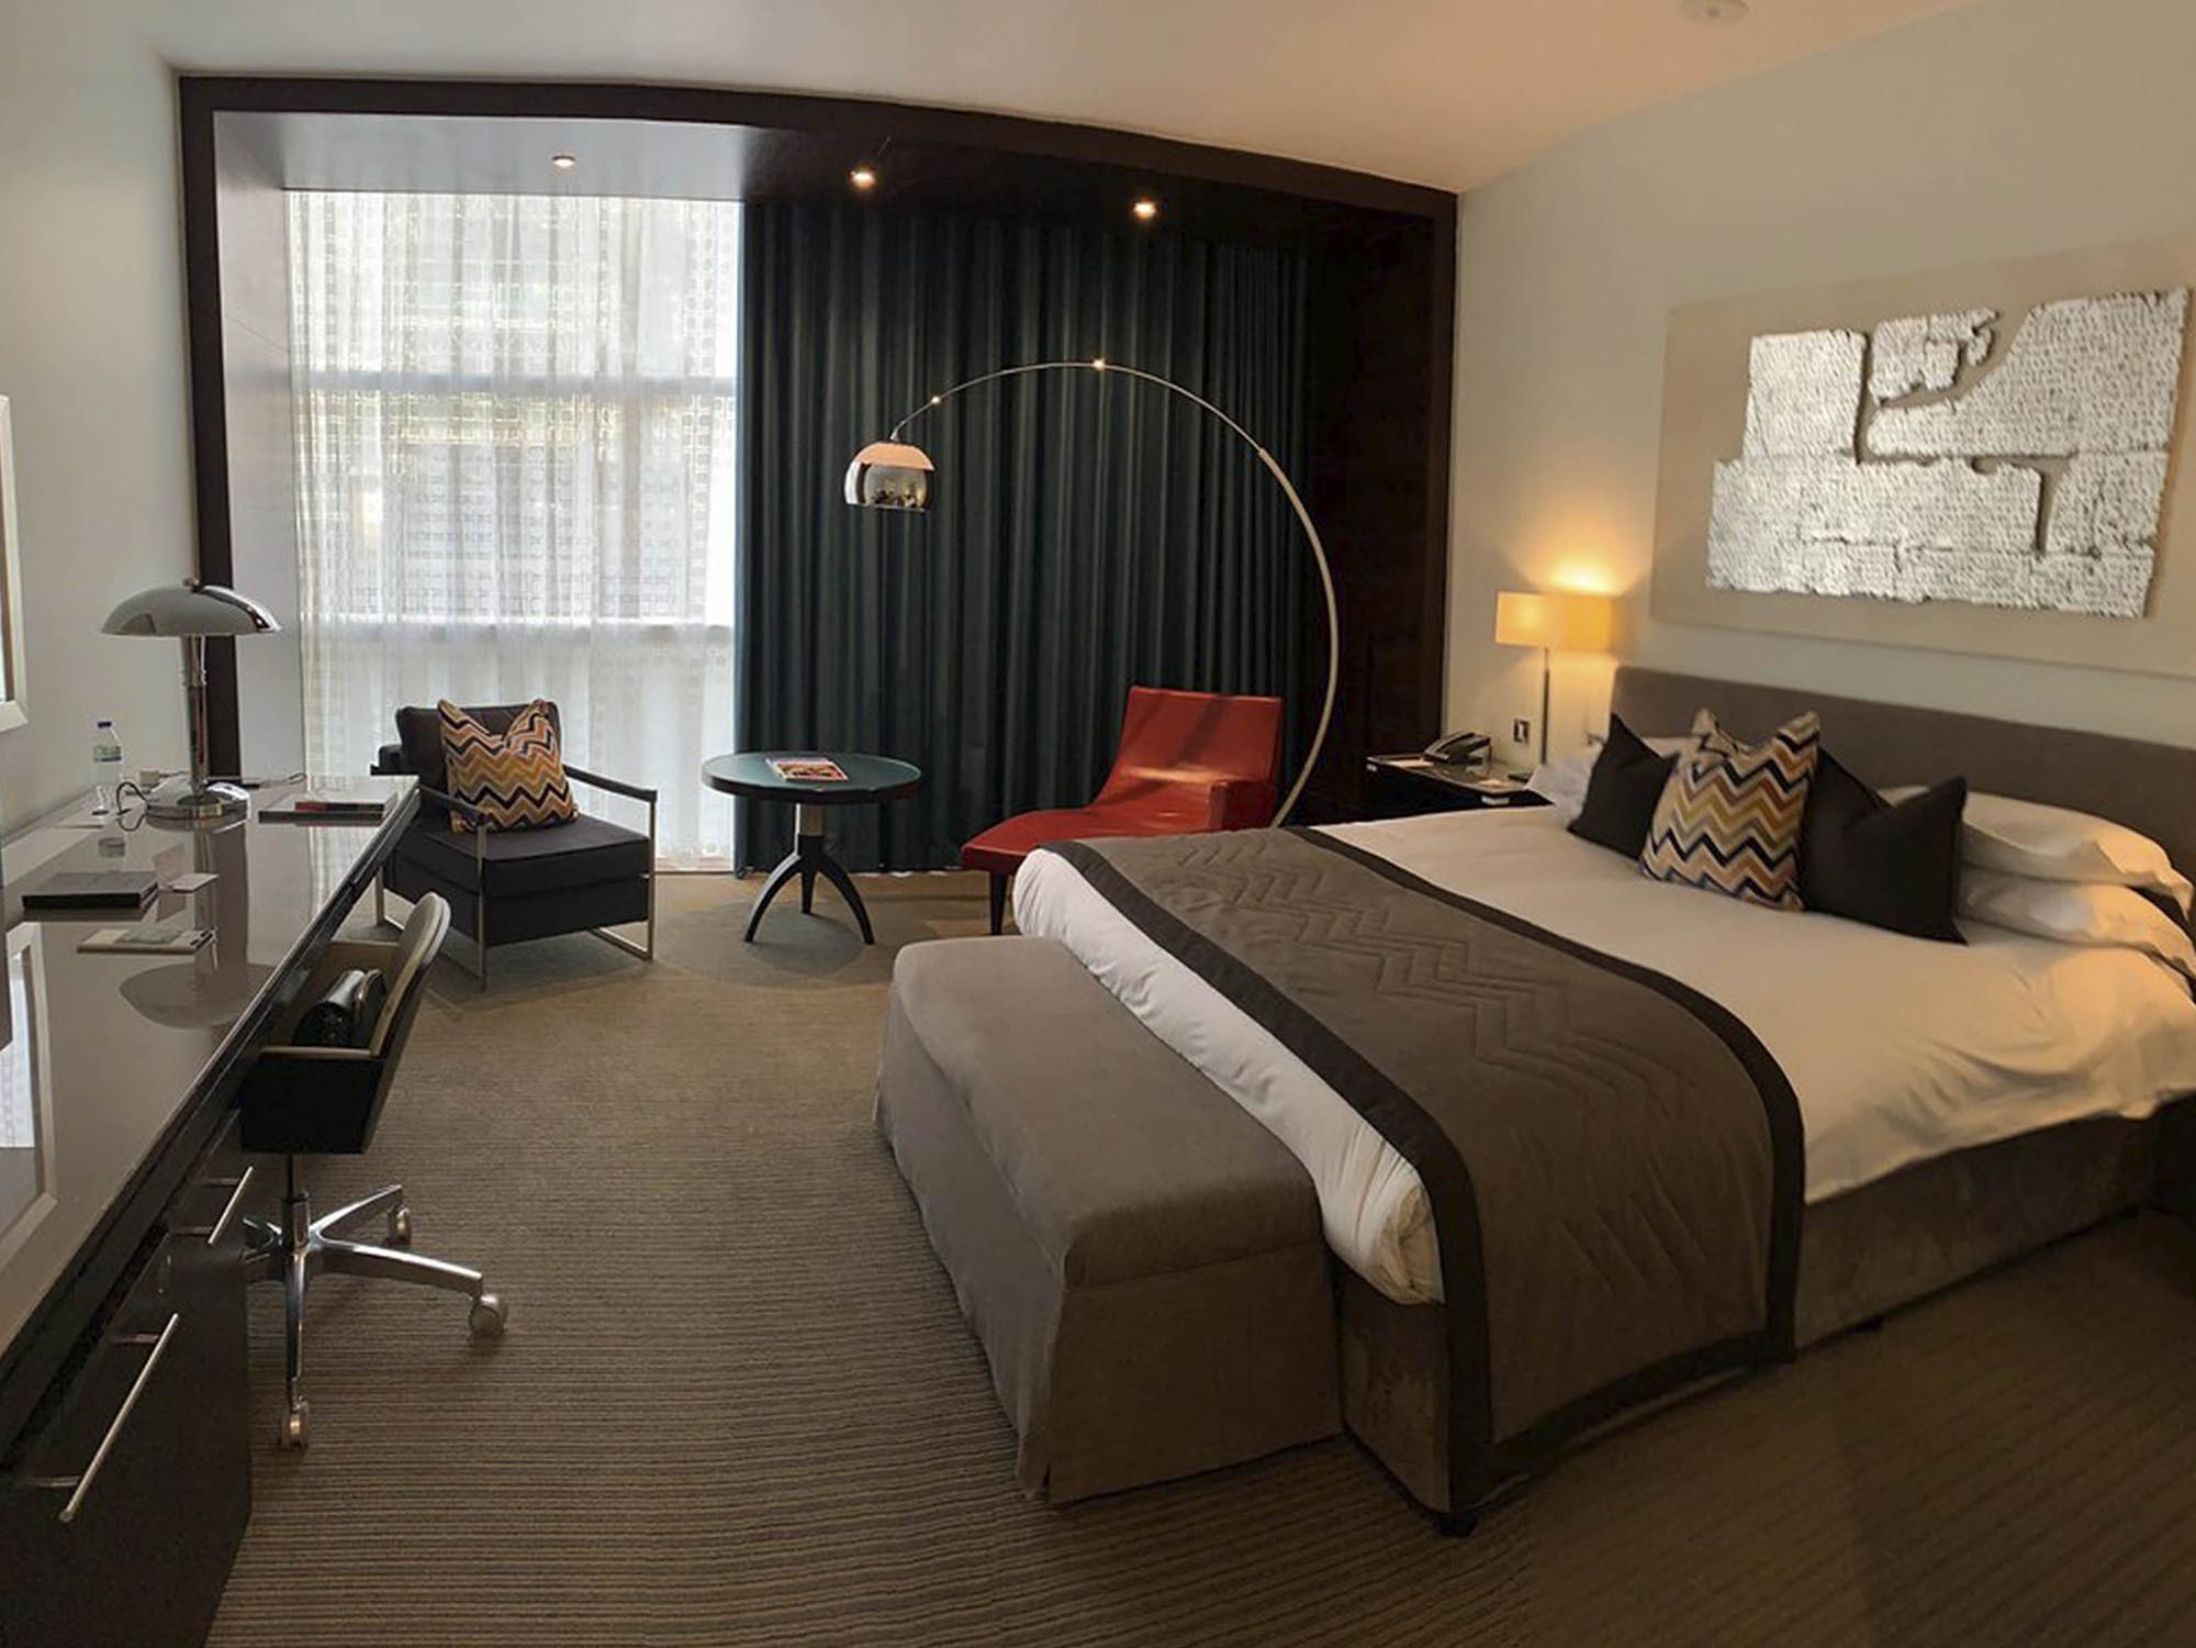 The Lowry Hotel - Best Hotels in Manchester